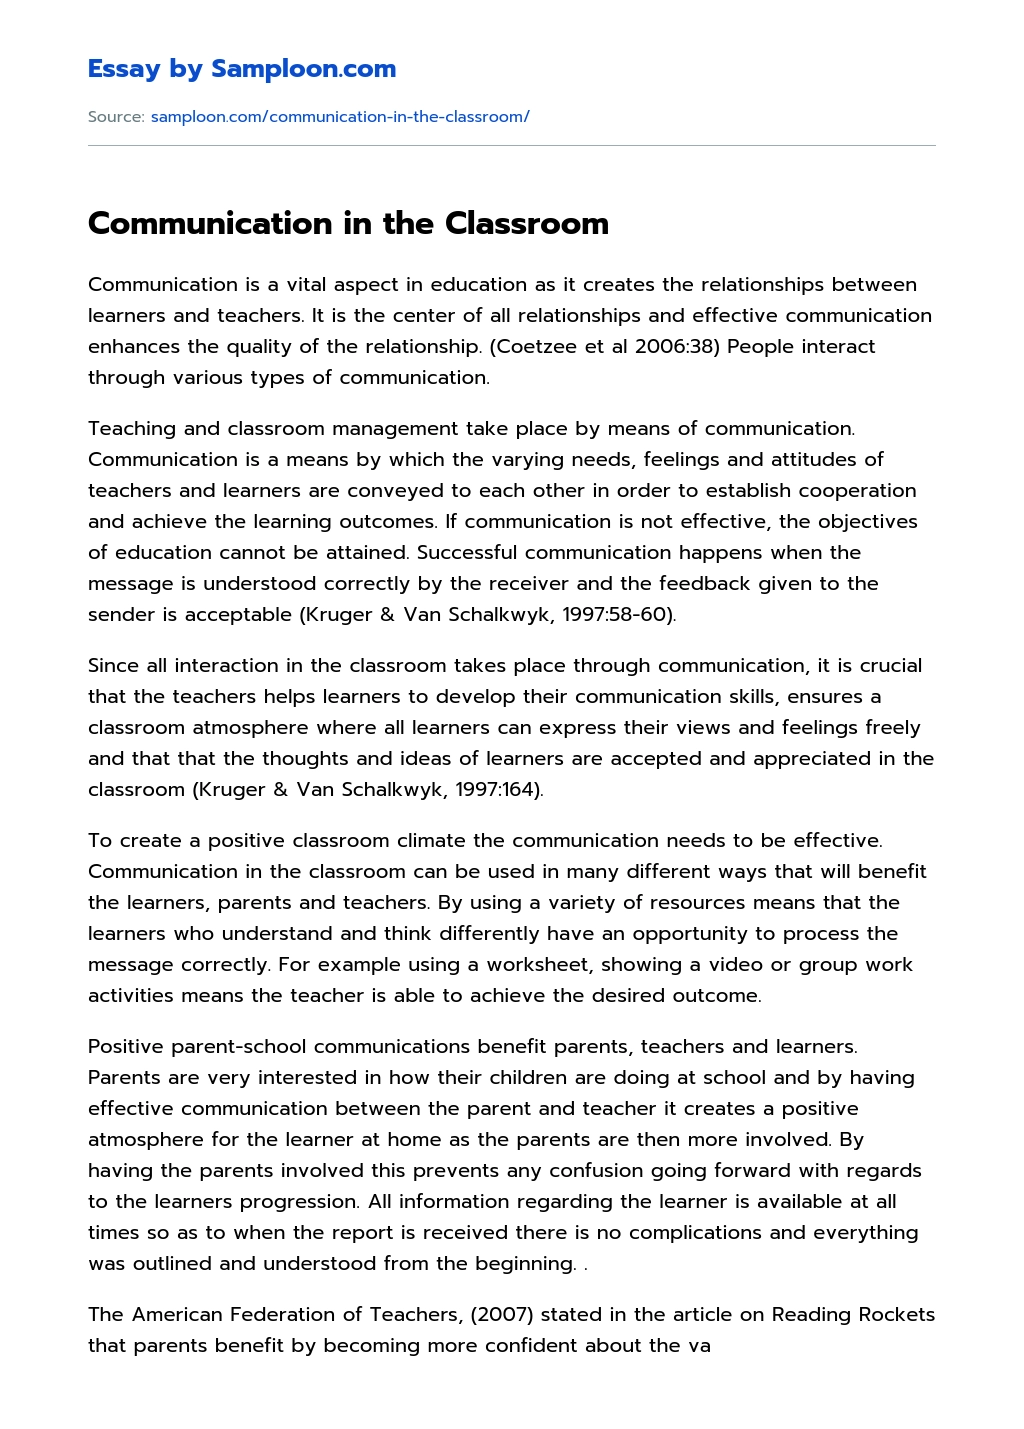 Communication in the Classroom essay